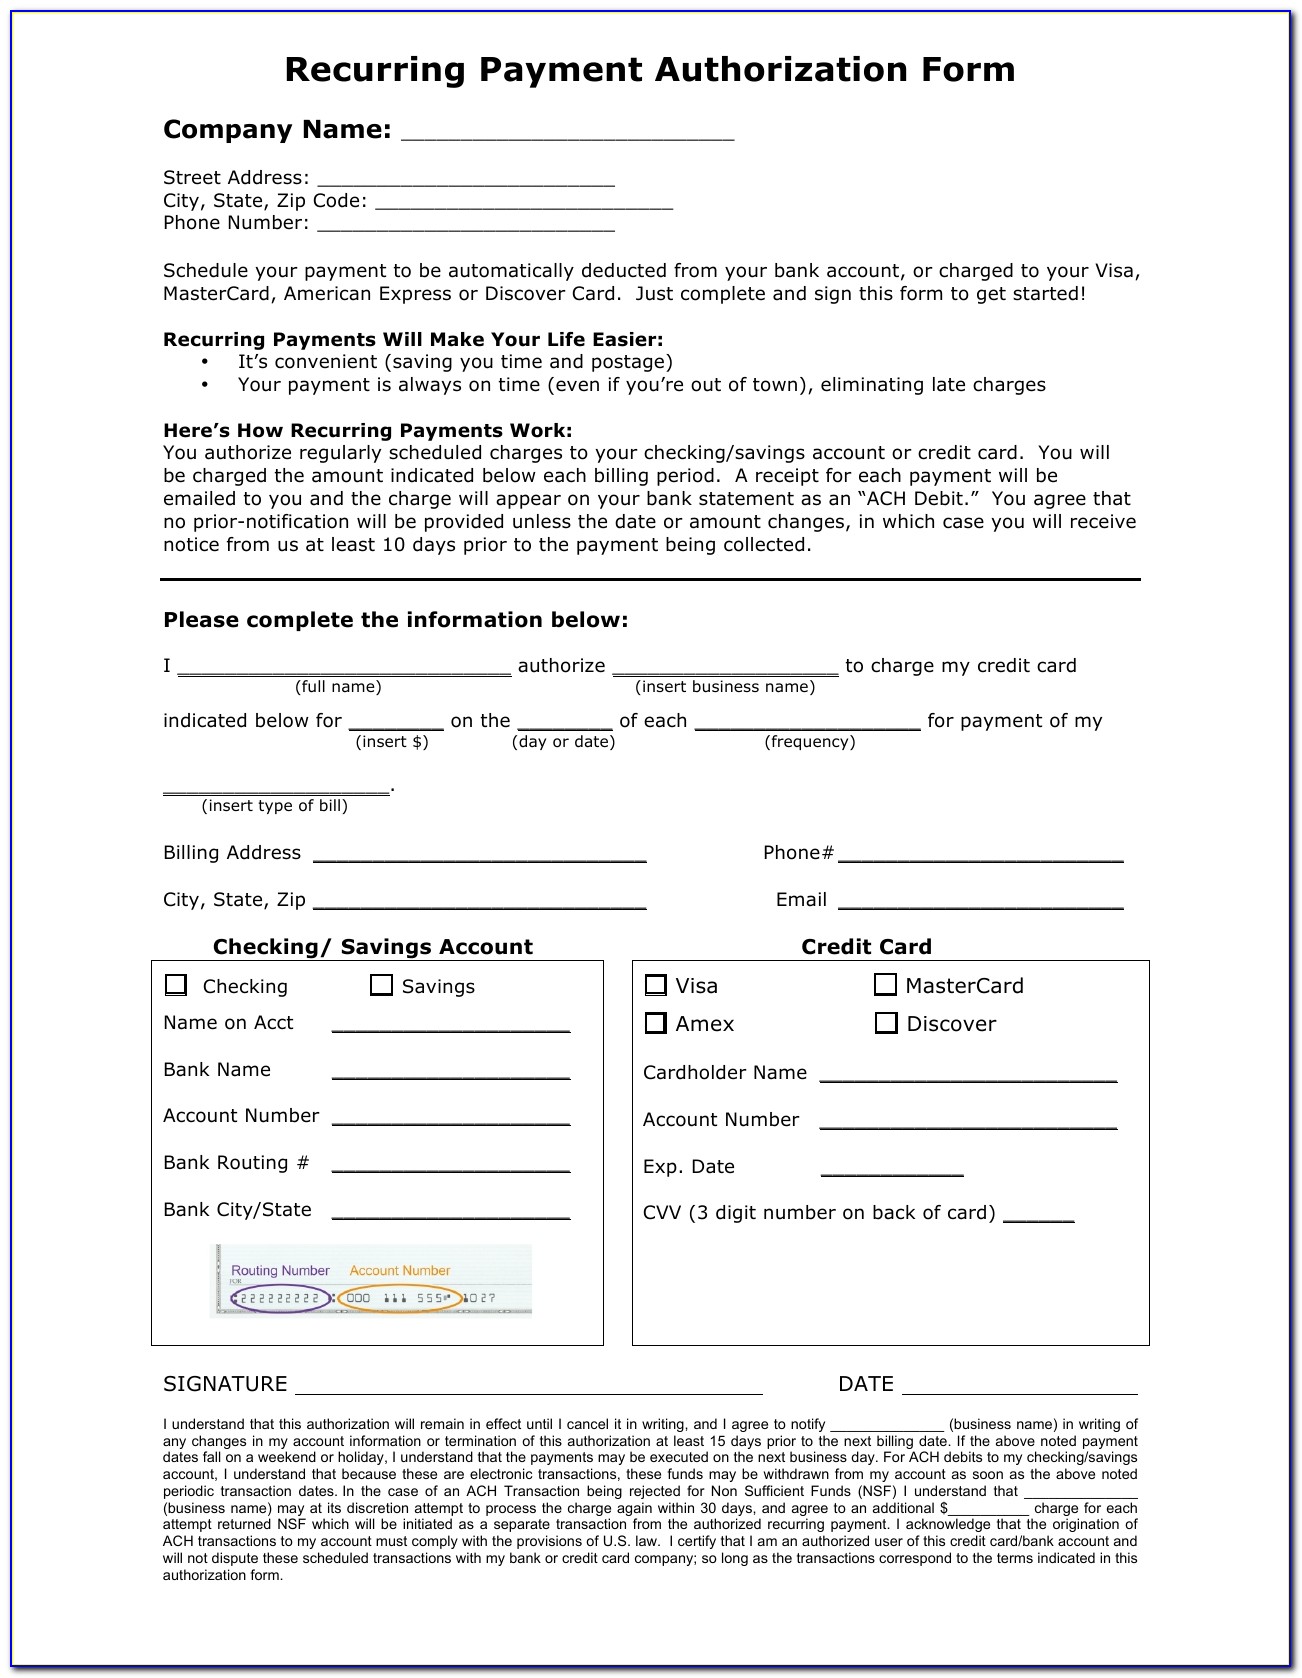 Download Recurring Payment Authorization Form Template | Credit Card Regarding Ach Authorization Form Template